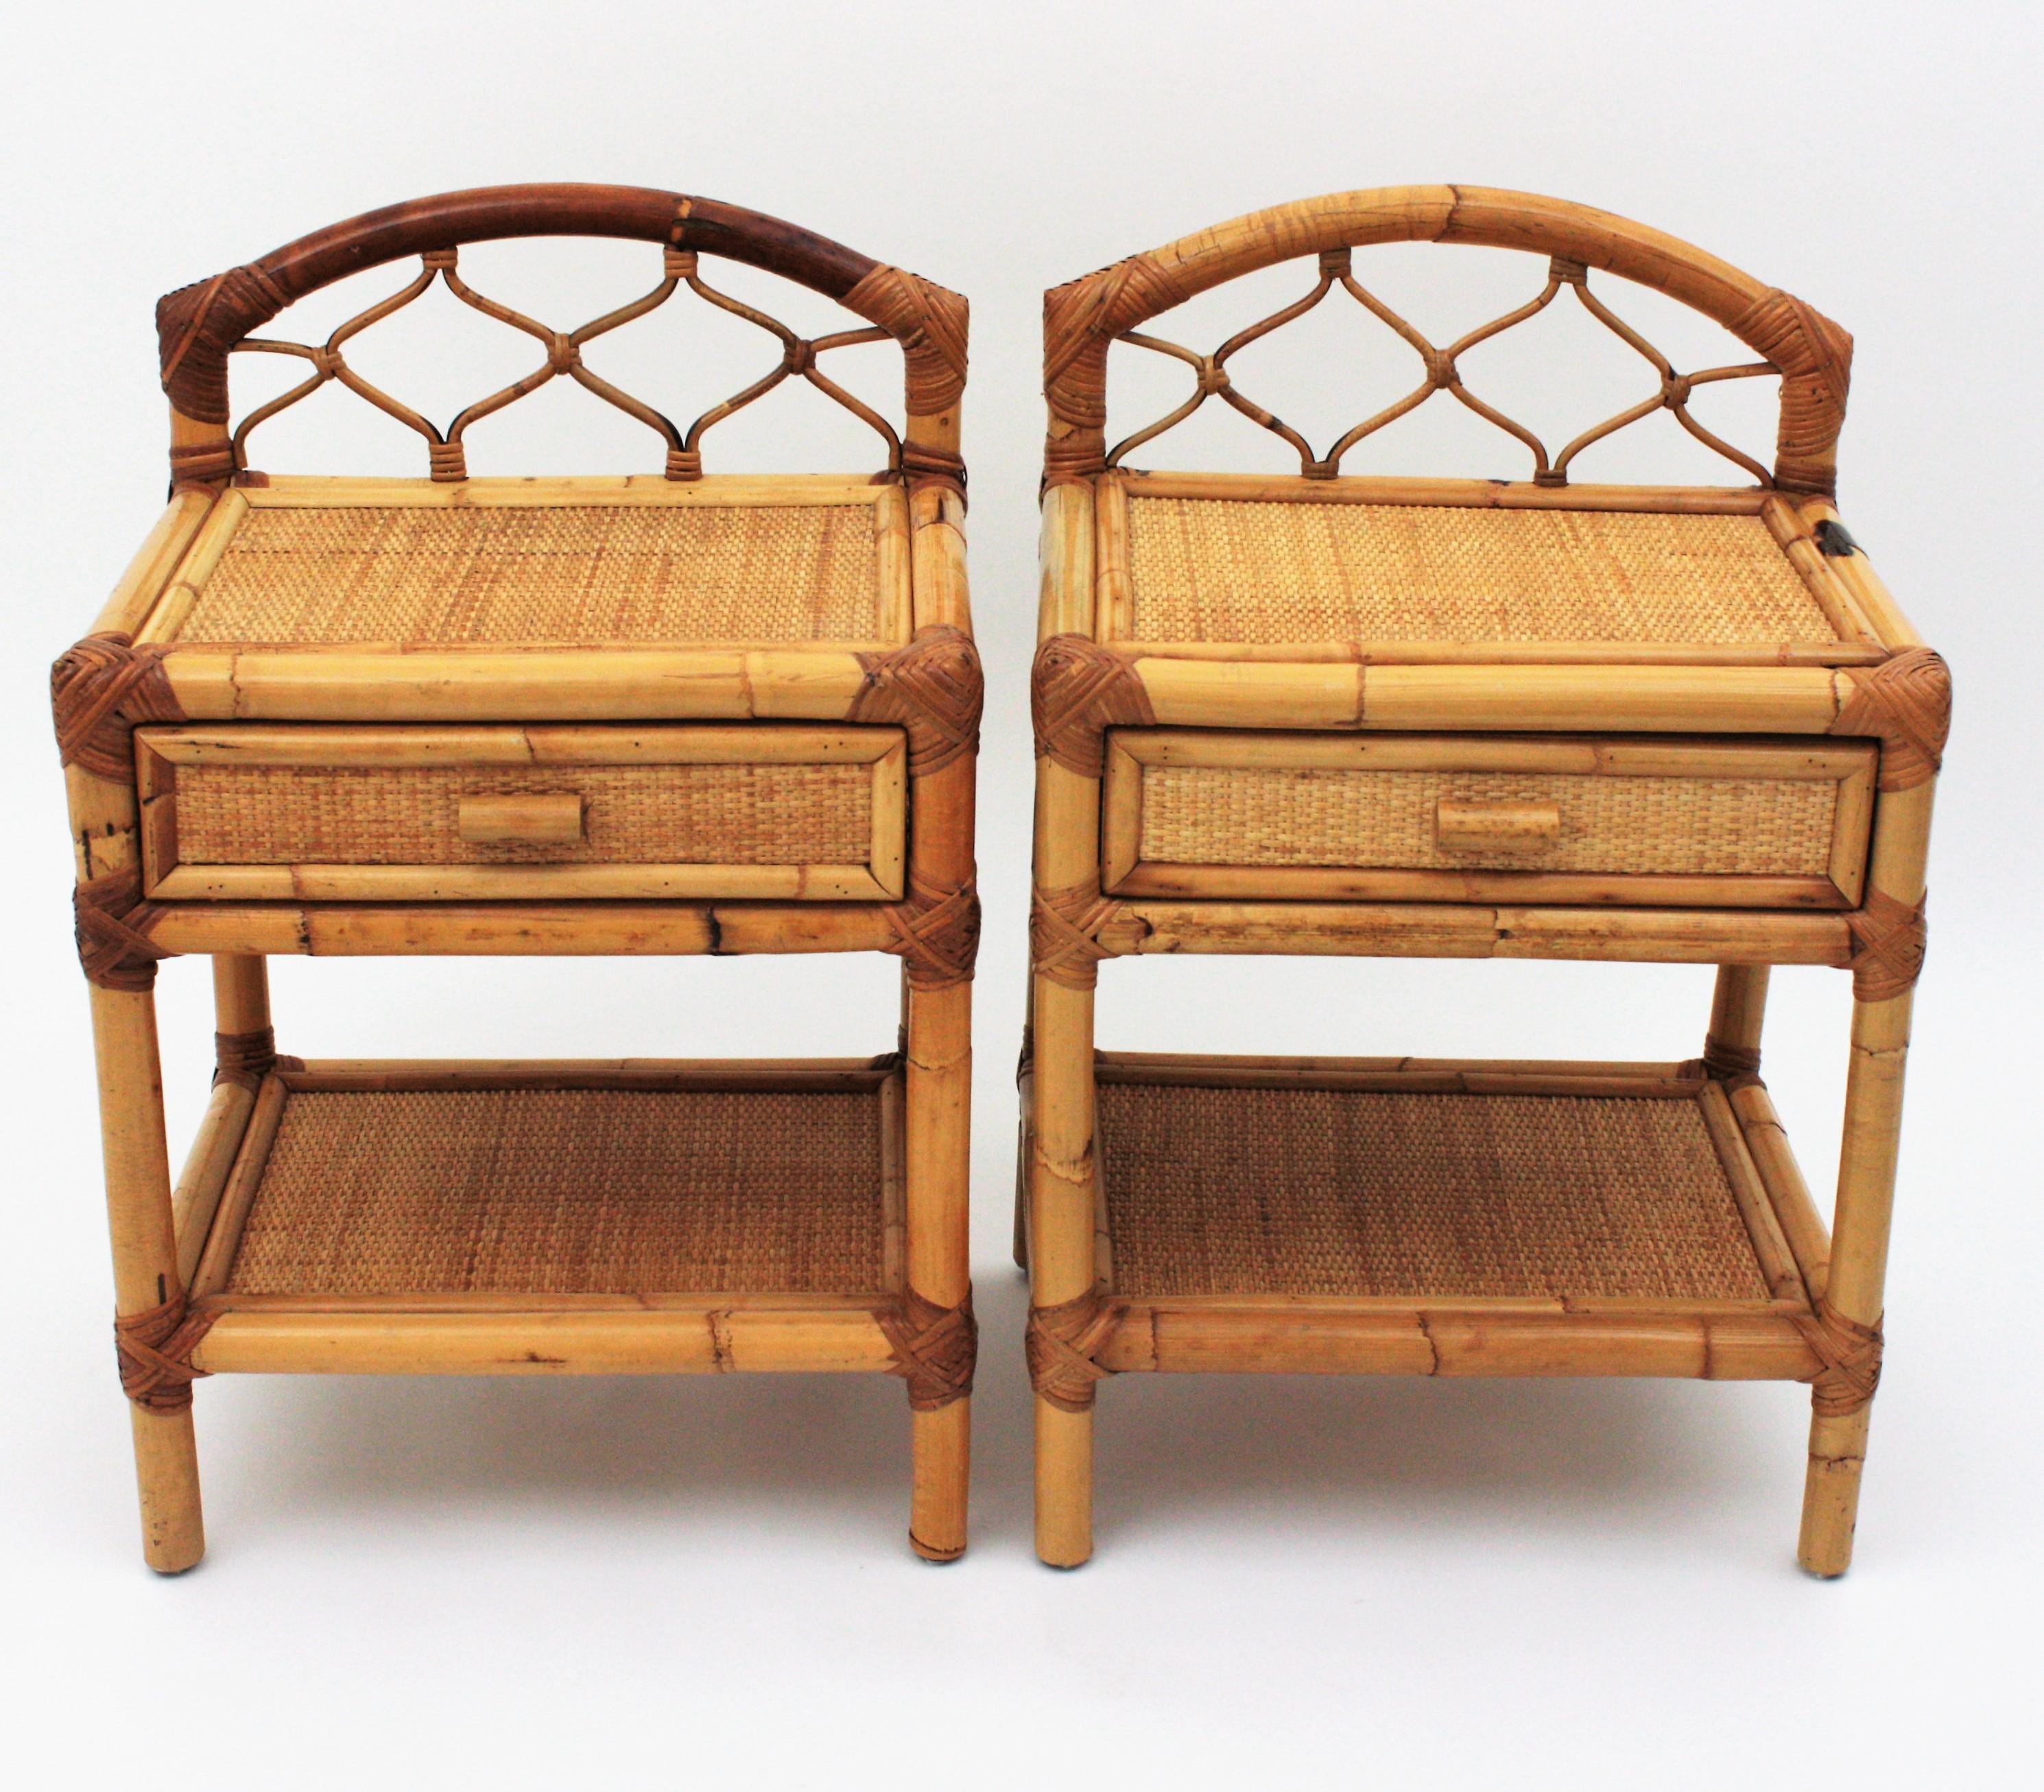 Pair of Spanish modern bamboo one-drawer night stands or small chests, 1970s
Beautiful pair of bamboo and rattan small chests, end tables or nightstands with a decorative crest
These small chests have a wood and bamboo construction featuring one